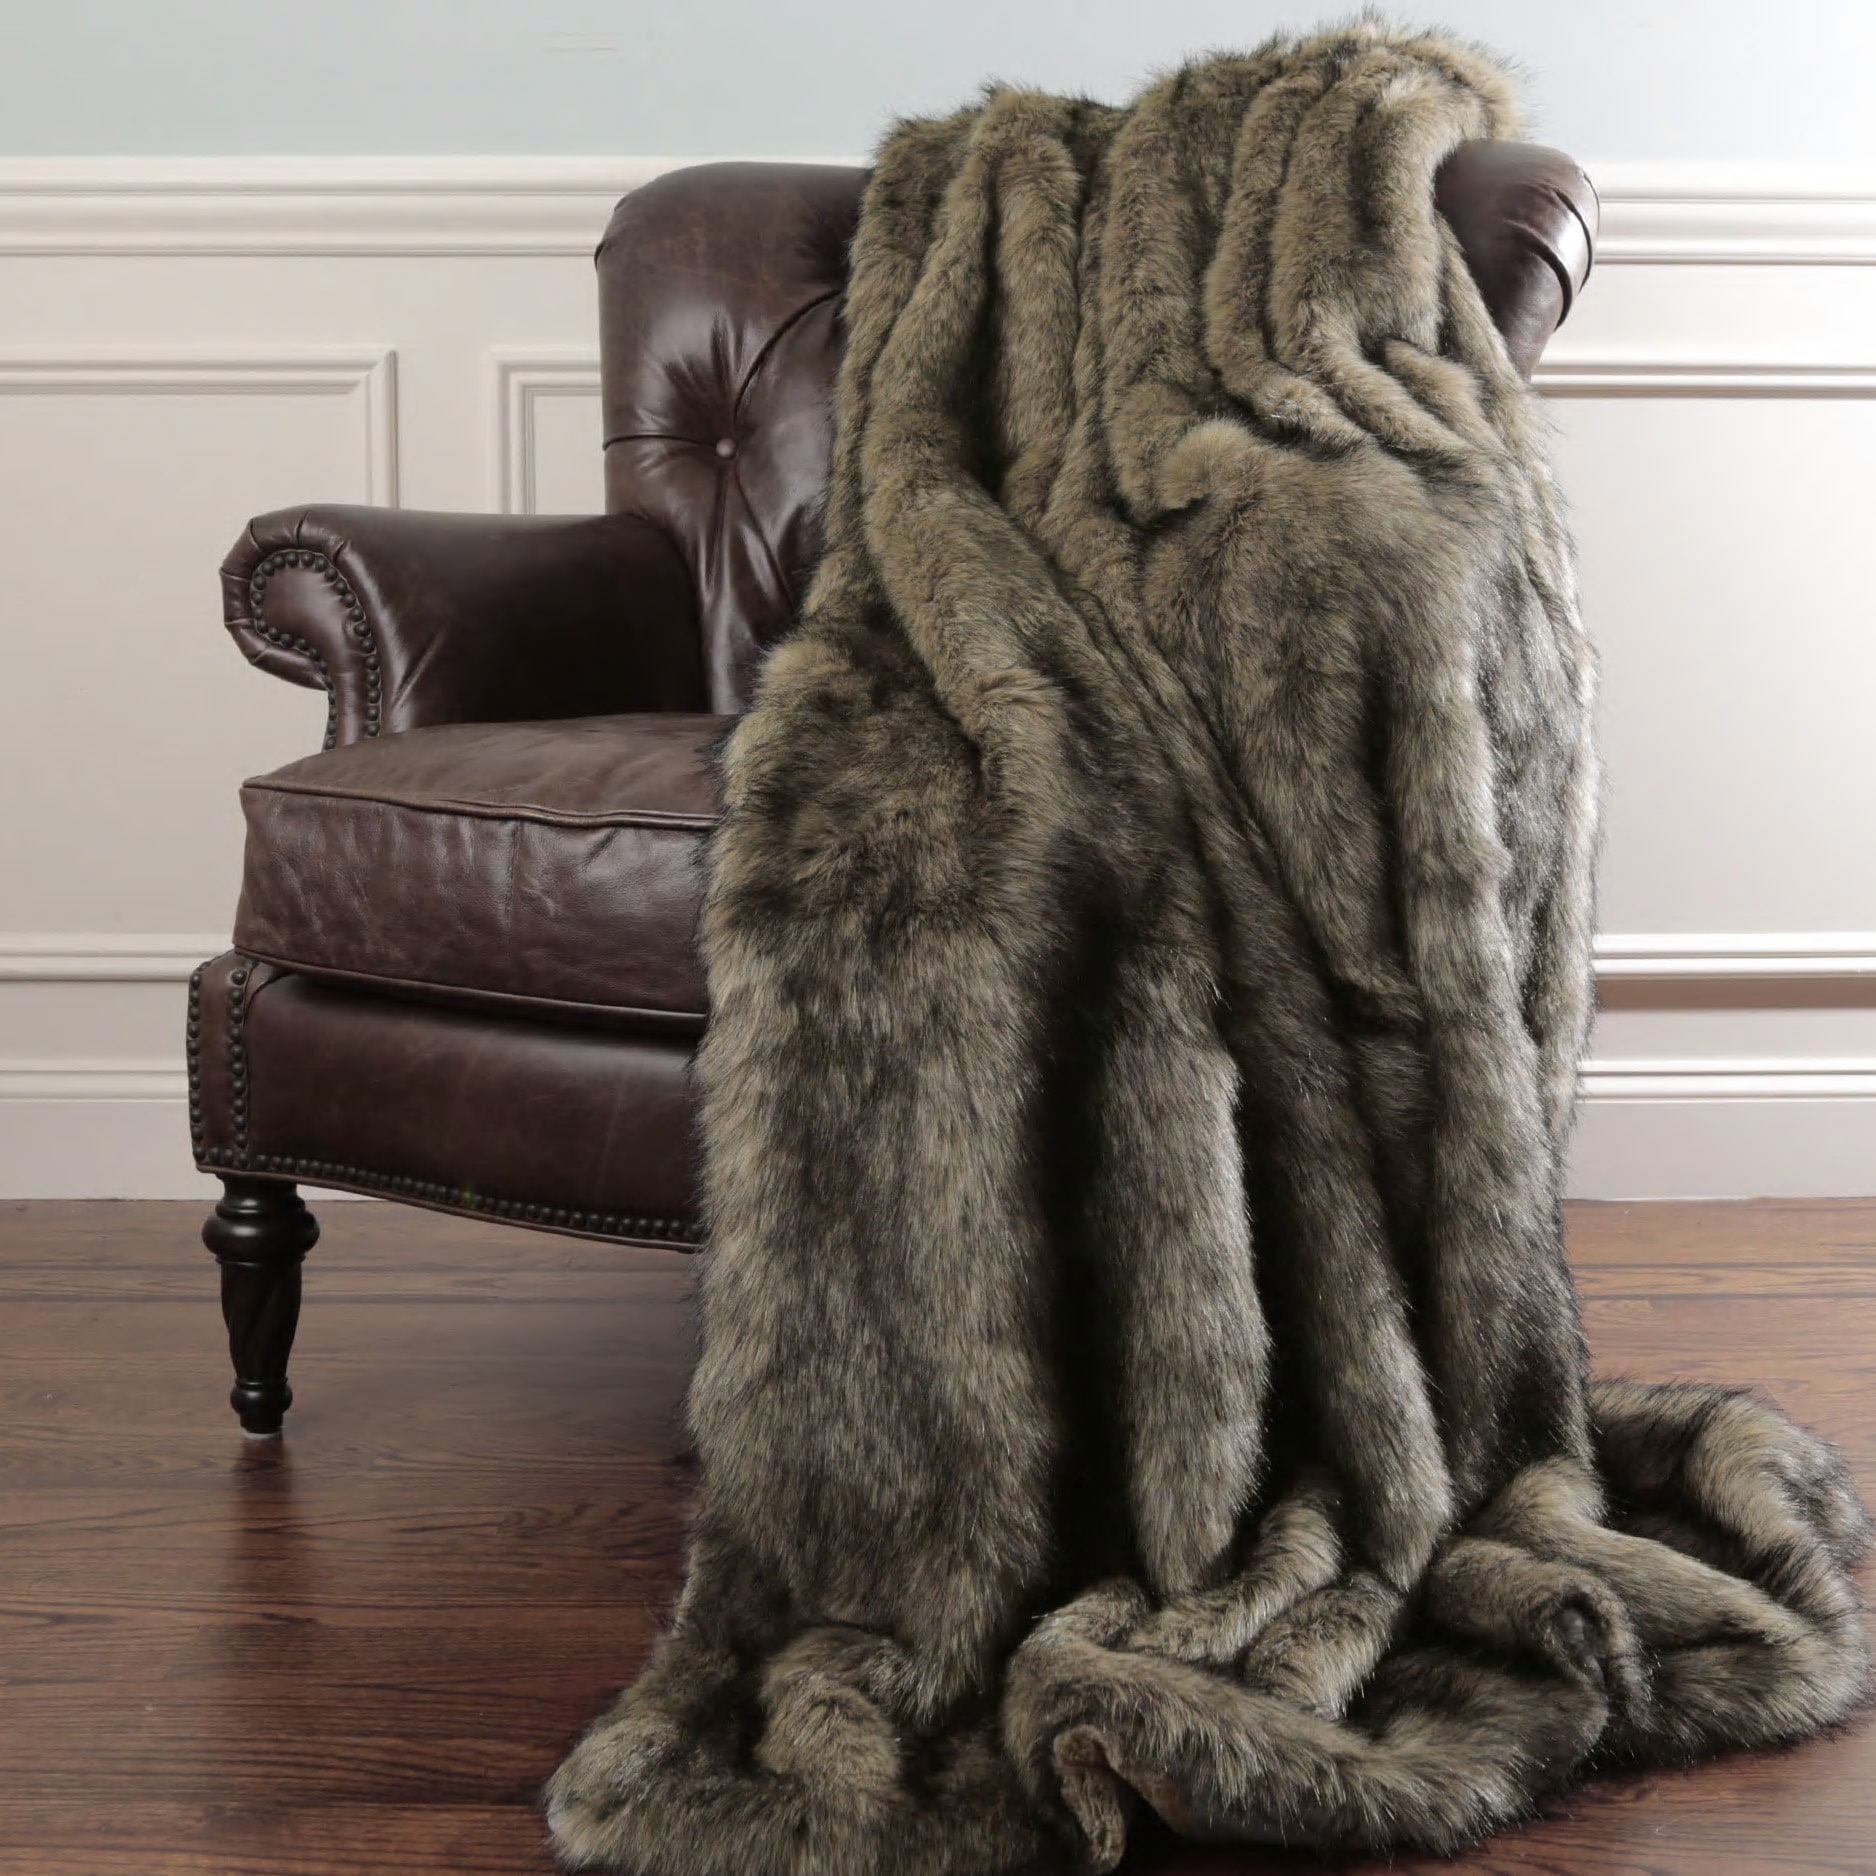 Luxury Plush Faux Fur Throw Blanket Soft Warm Fluffy for Couch Home 60''x 58'' 